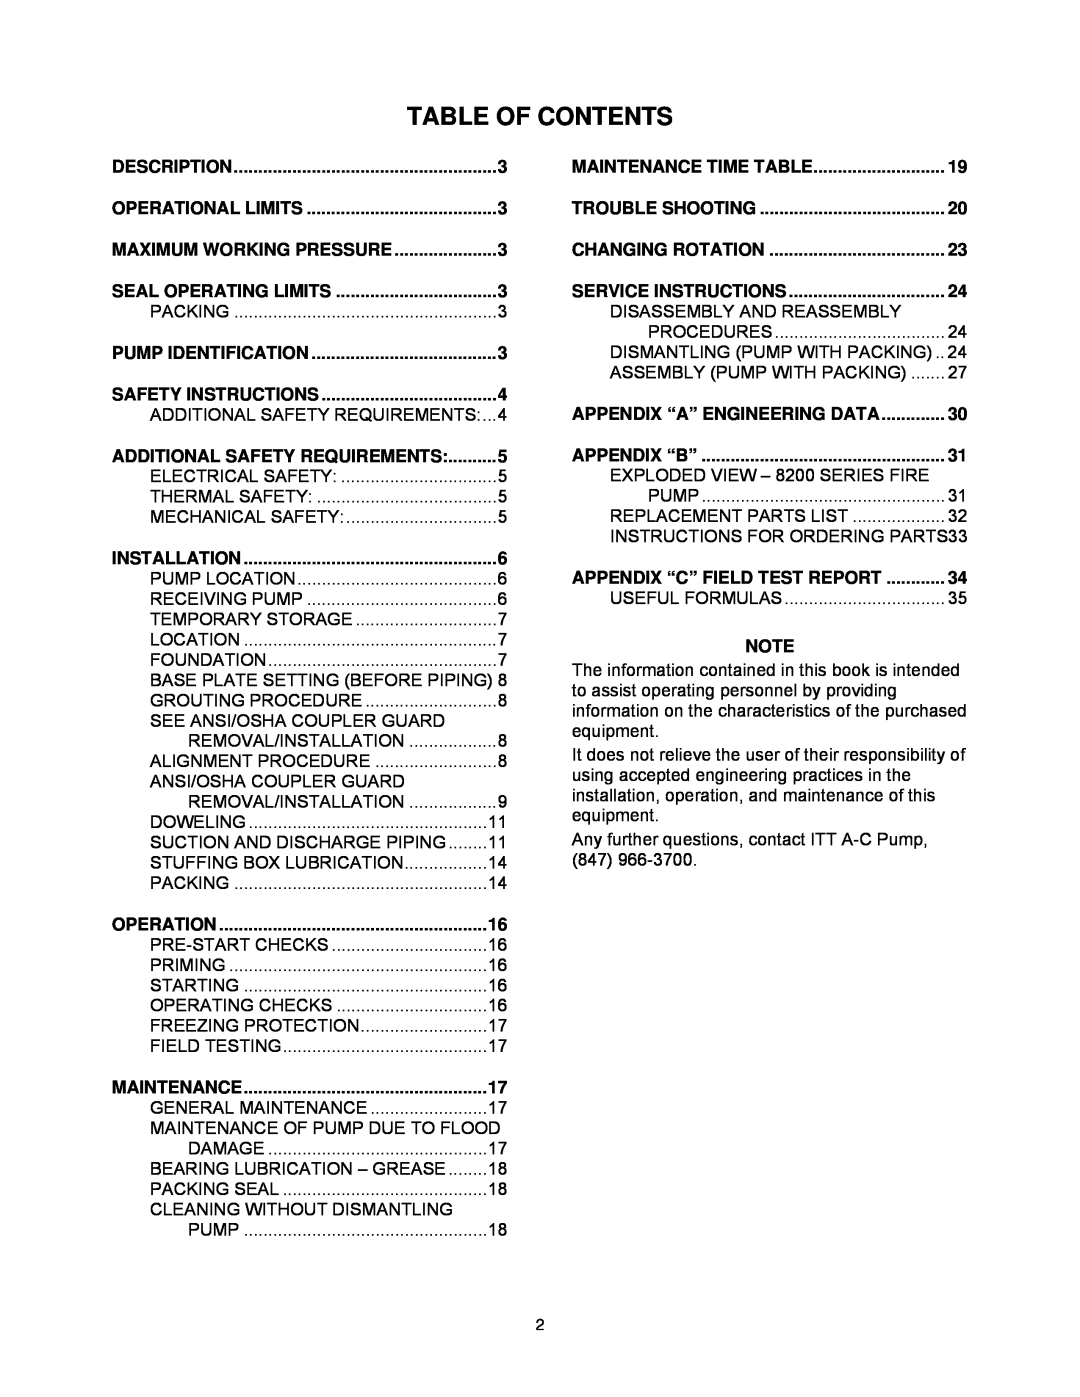 AC International 8200 Series instruction manual Table Of Contents, Additional Safety Requirements, Maintenance Time Table 